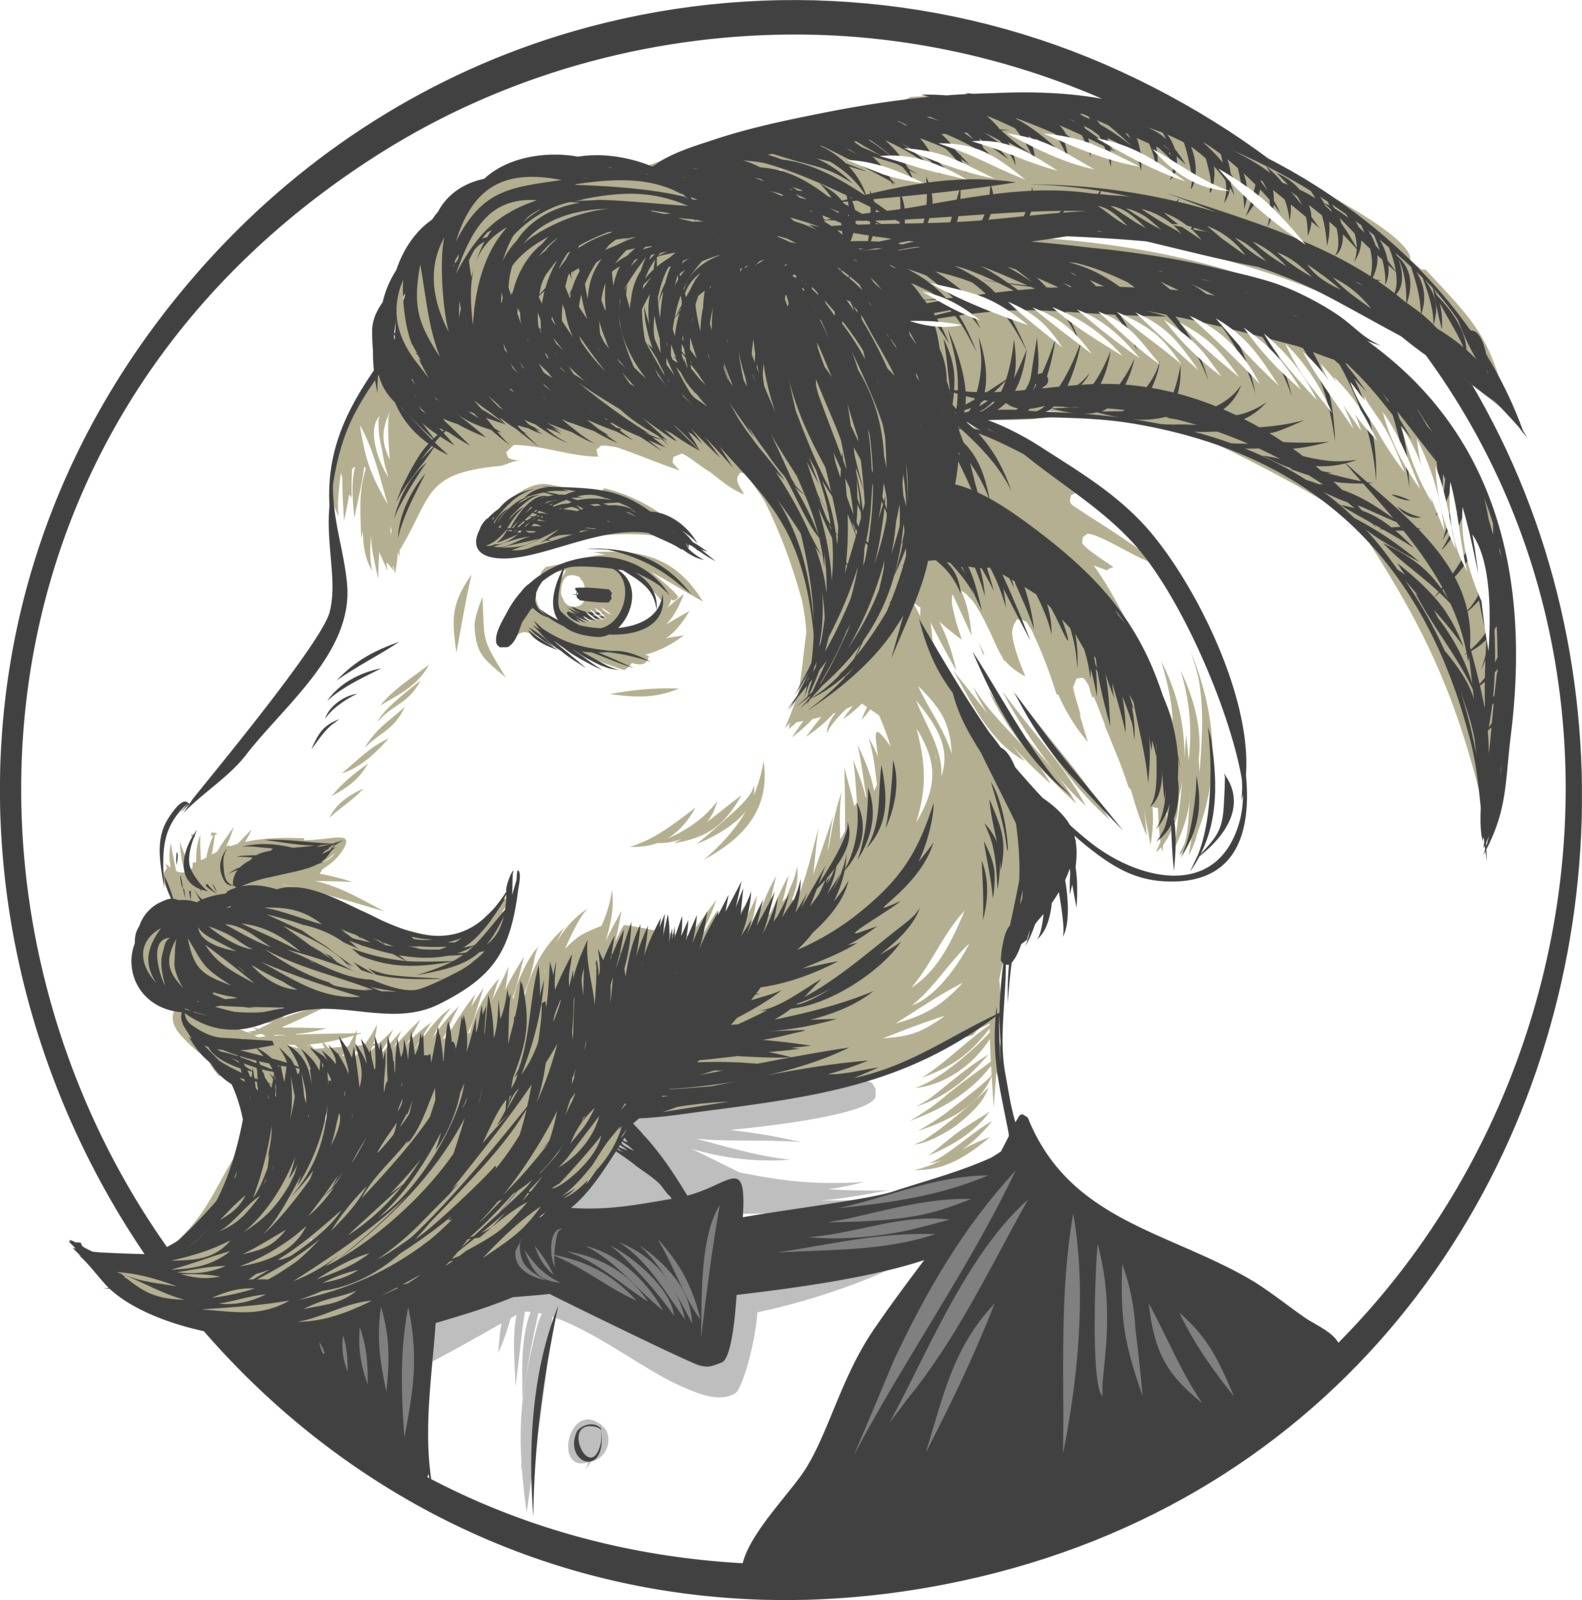 Drawing sketch style illustration of a goat ram with big horns and moustache beard owearing tie tuxedo suit looking to the side set inside circle. 